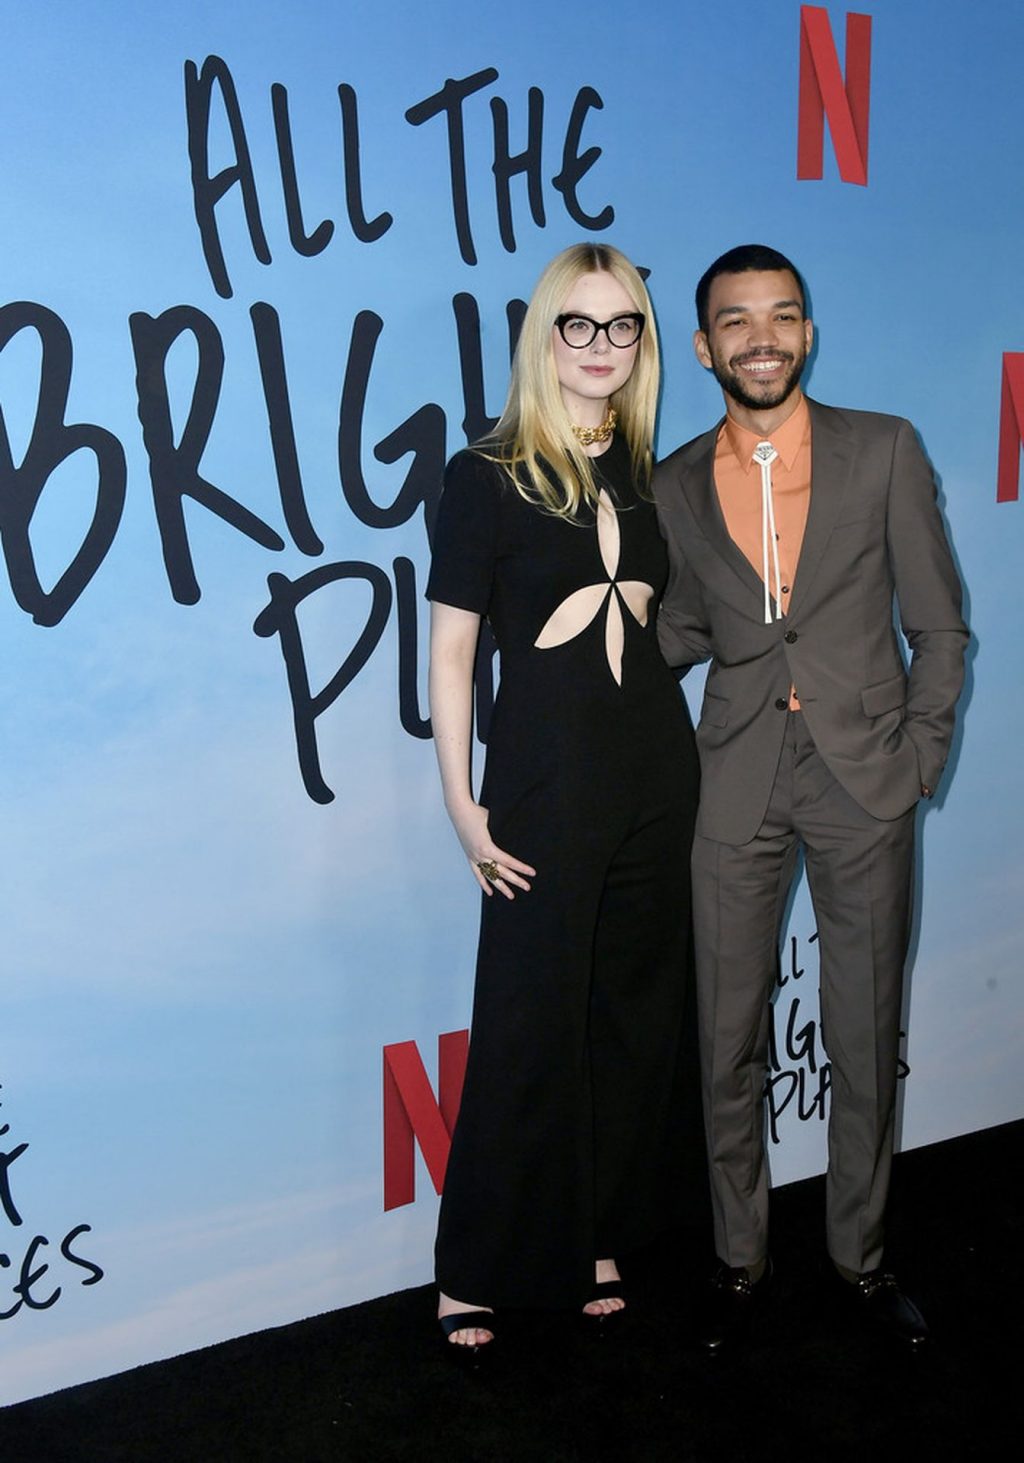 Elle Fanning Shows Her Small Tits at the Netflix’s All The Bright Places Special Screening (82 Photos)